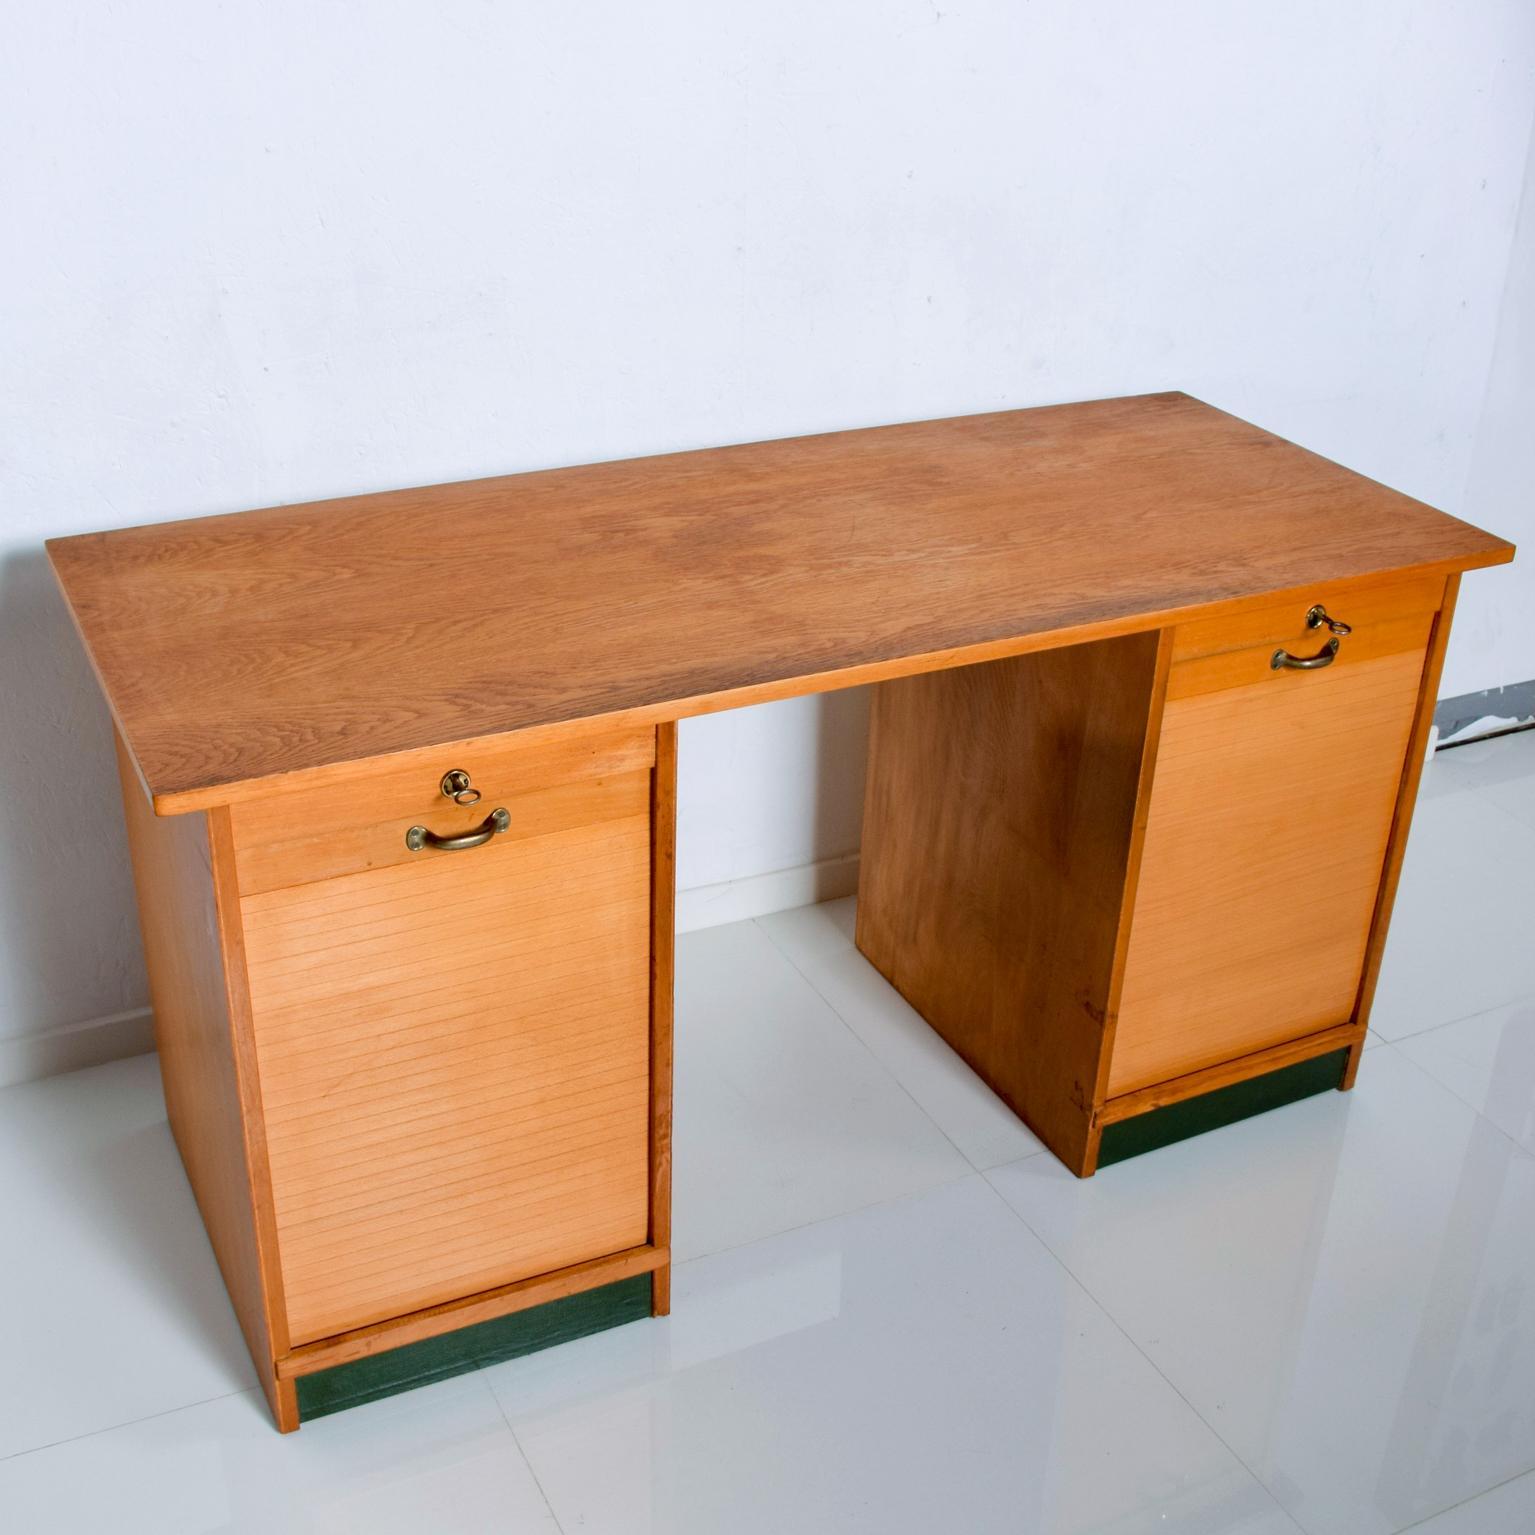 For your pleasure: Vintage Möbelfabrik Desk in Blonde Wood by Adolf Maier. Made in Germany. 
The desk retains bronze maker's label, Adolf Maier, please see images. 
Vintage condition, wear consistent with age. Please review all the images. See